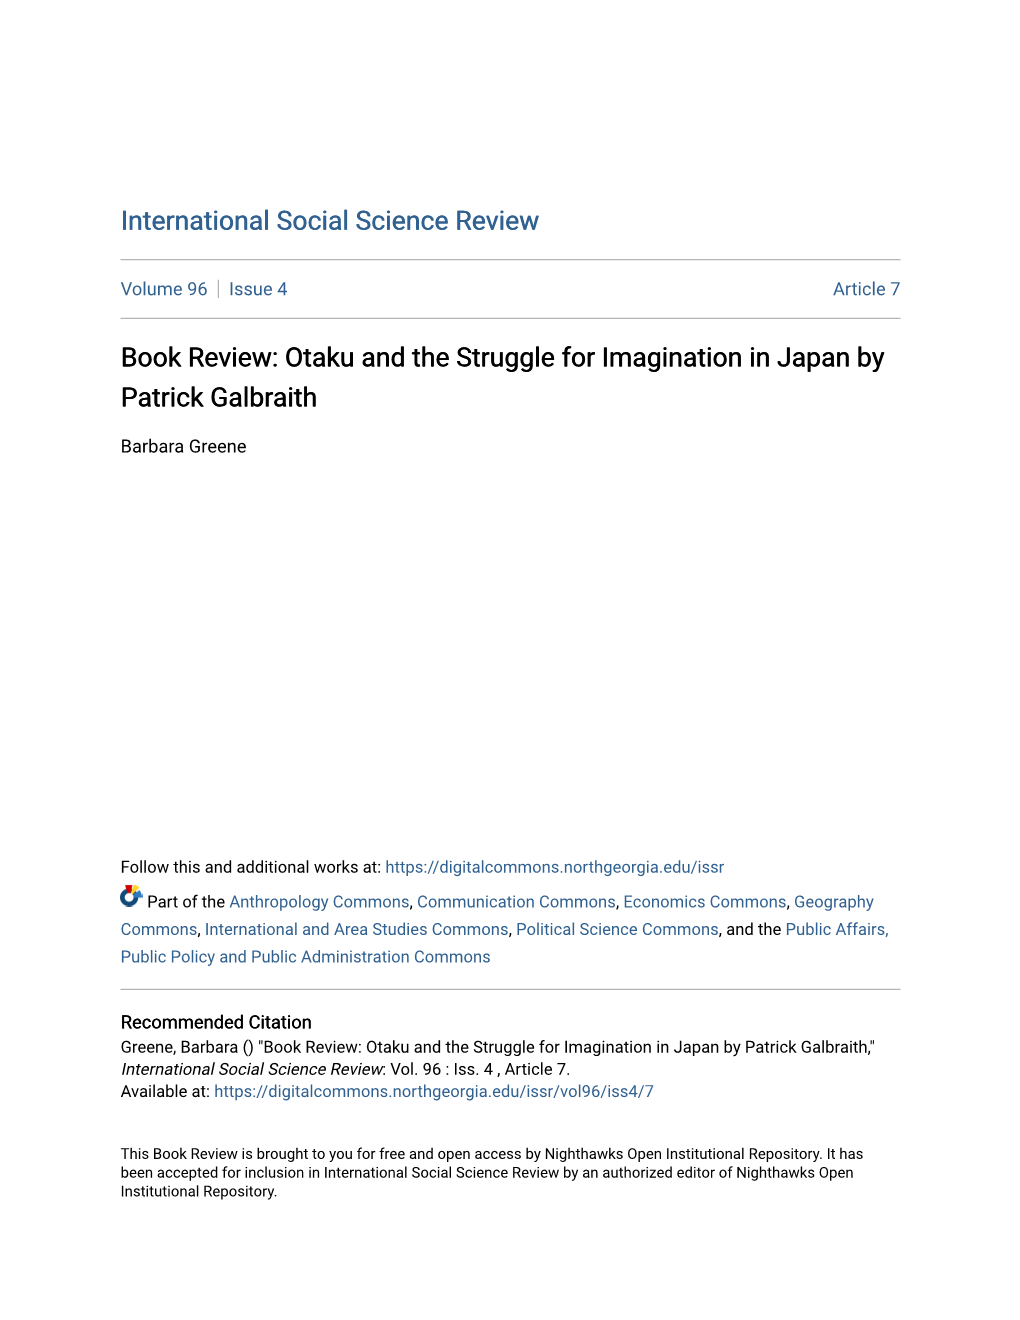 Otaku and the Struggle for Imagination in Japan by Patrick Galbraith